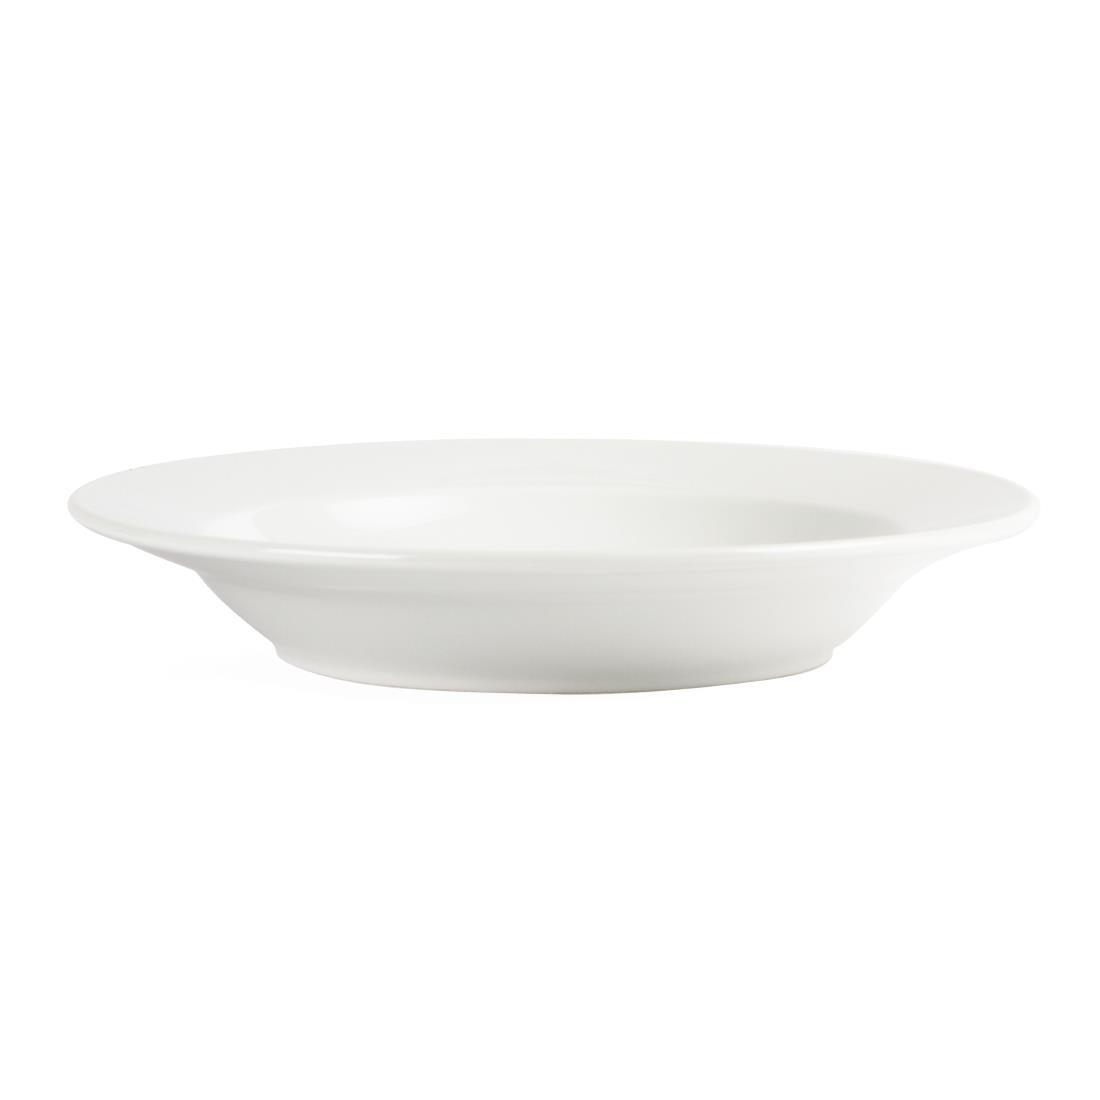 Olympia Whiteware Deep Plates 270mm 430ml (Pack of 6) - C363  - 3